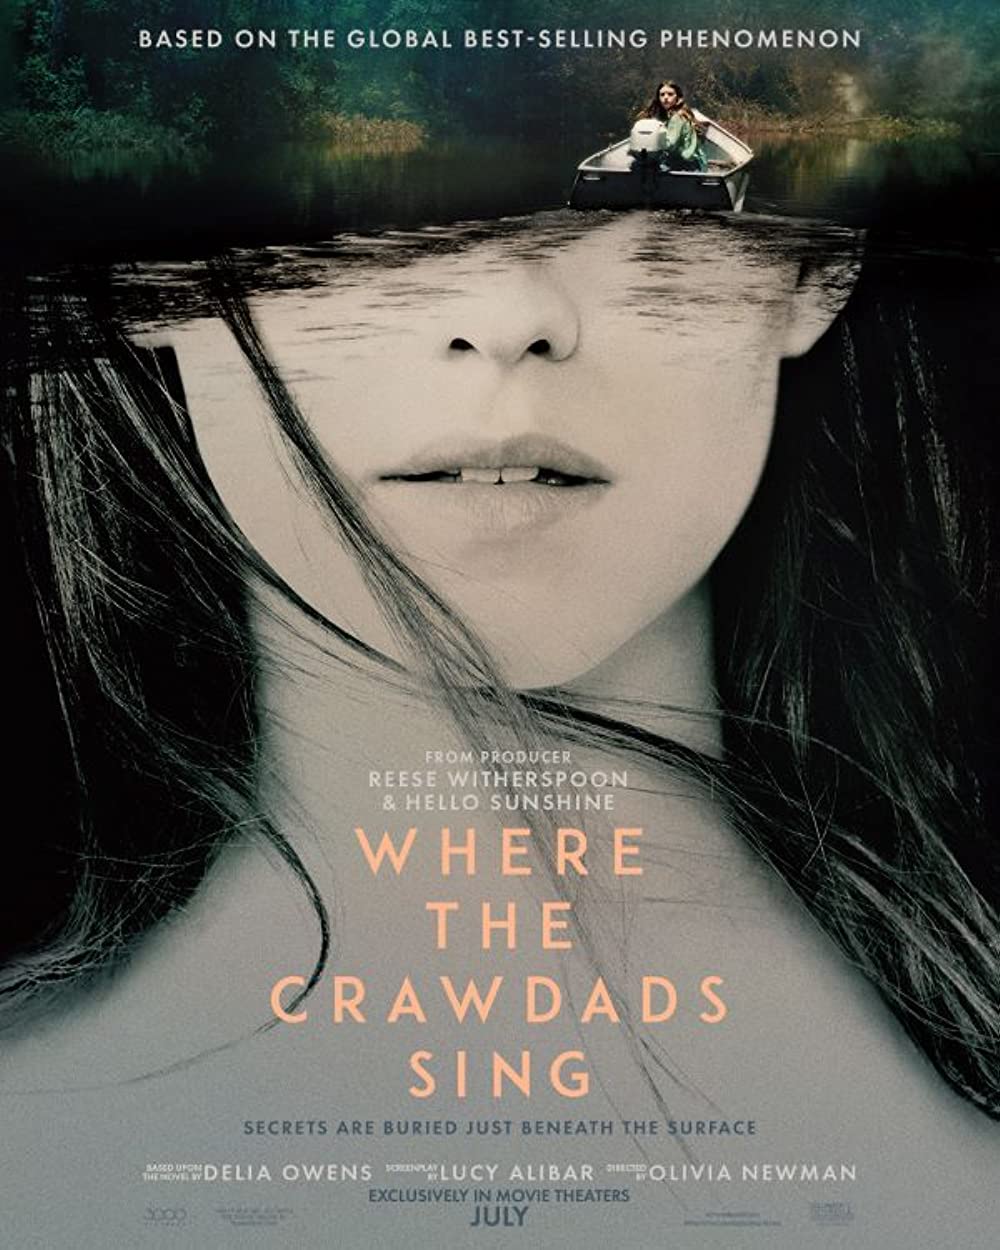 Where the Crawdads Sing movie poster. Woman with eyes covered.